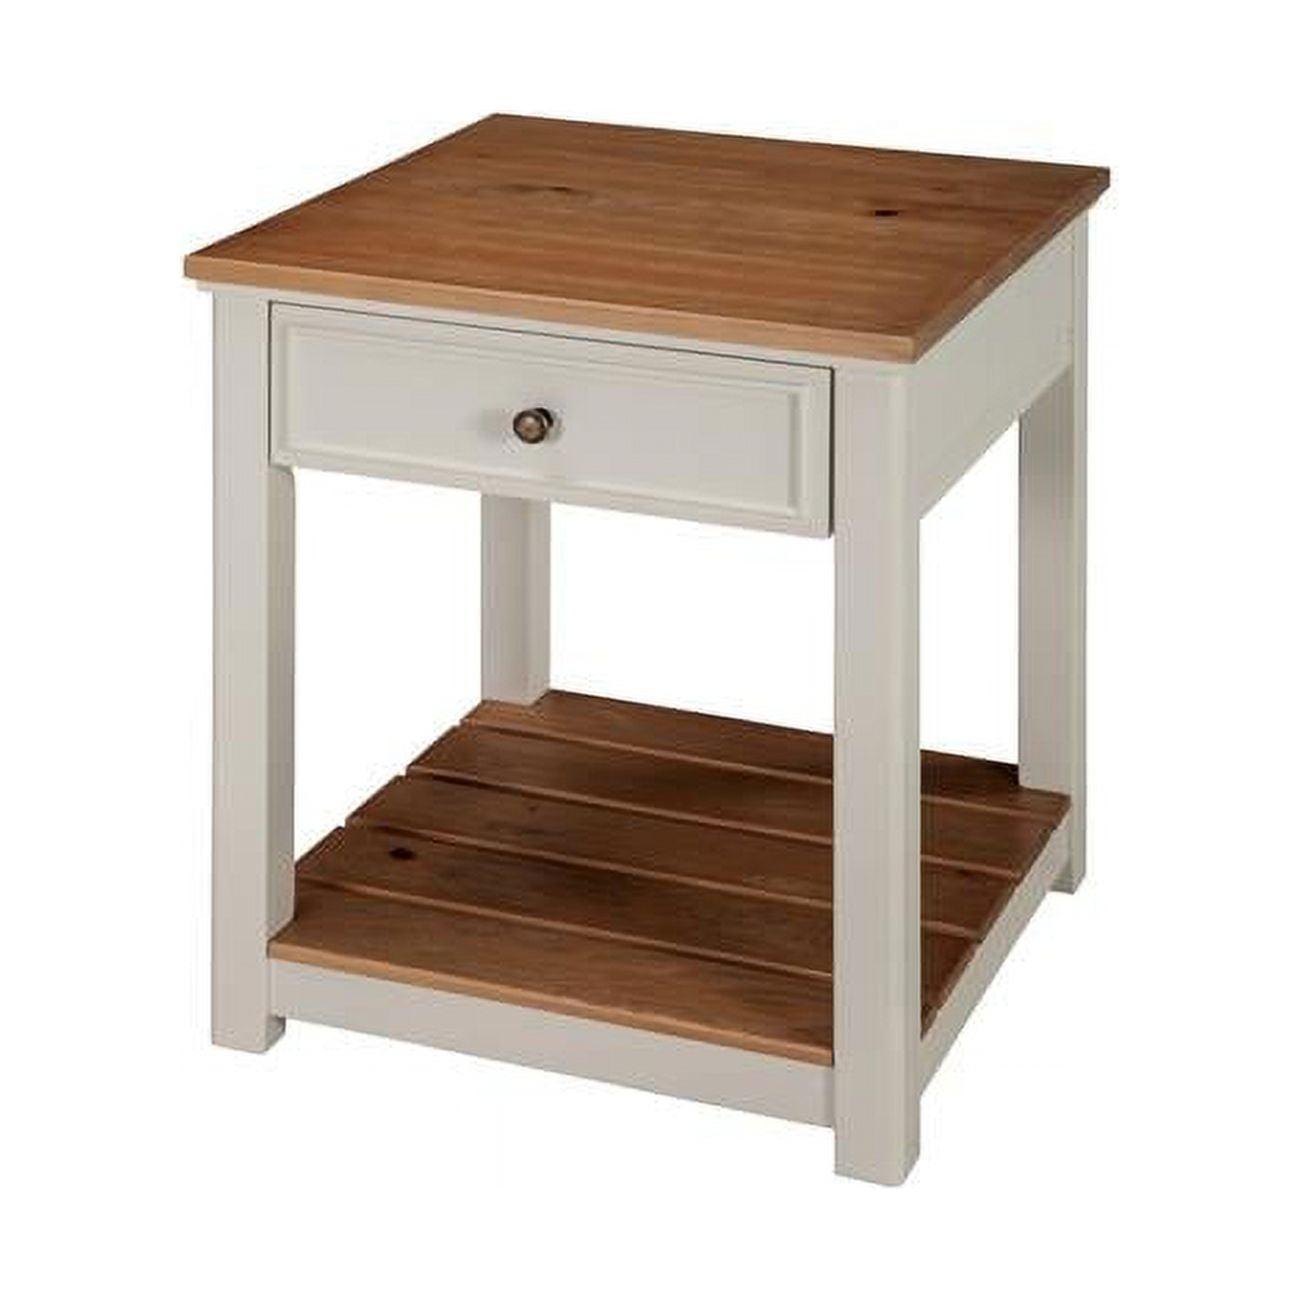 Savannah Coastal Ivory End Table with Natural Wood Top and Storage